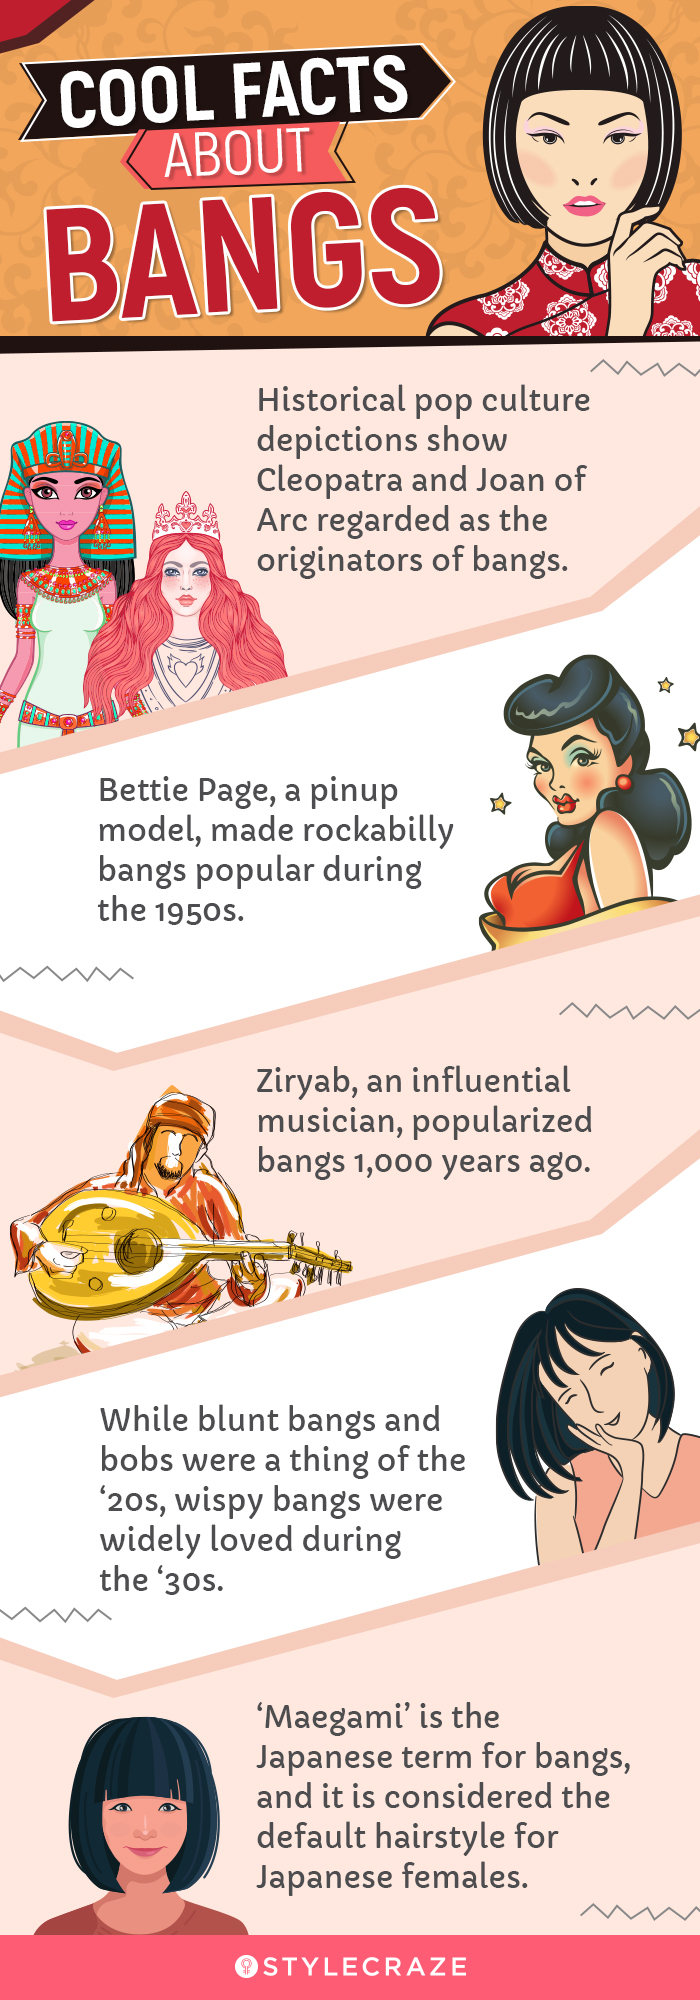 cool facts about bangs [infographic]